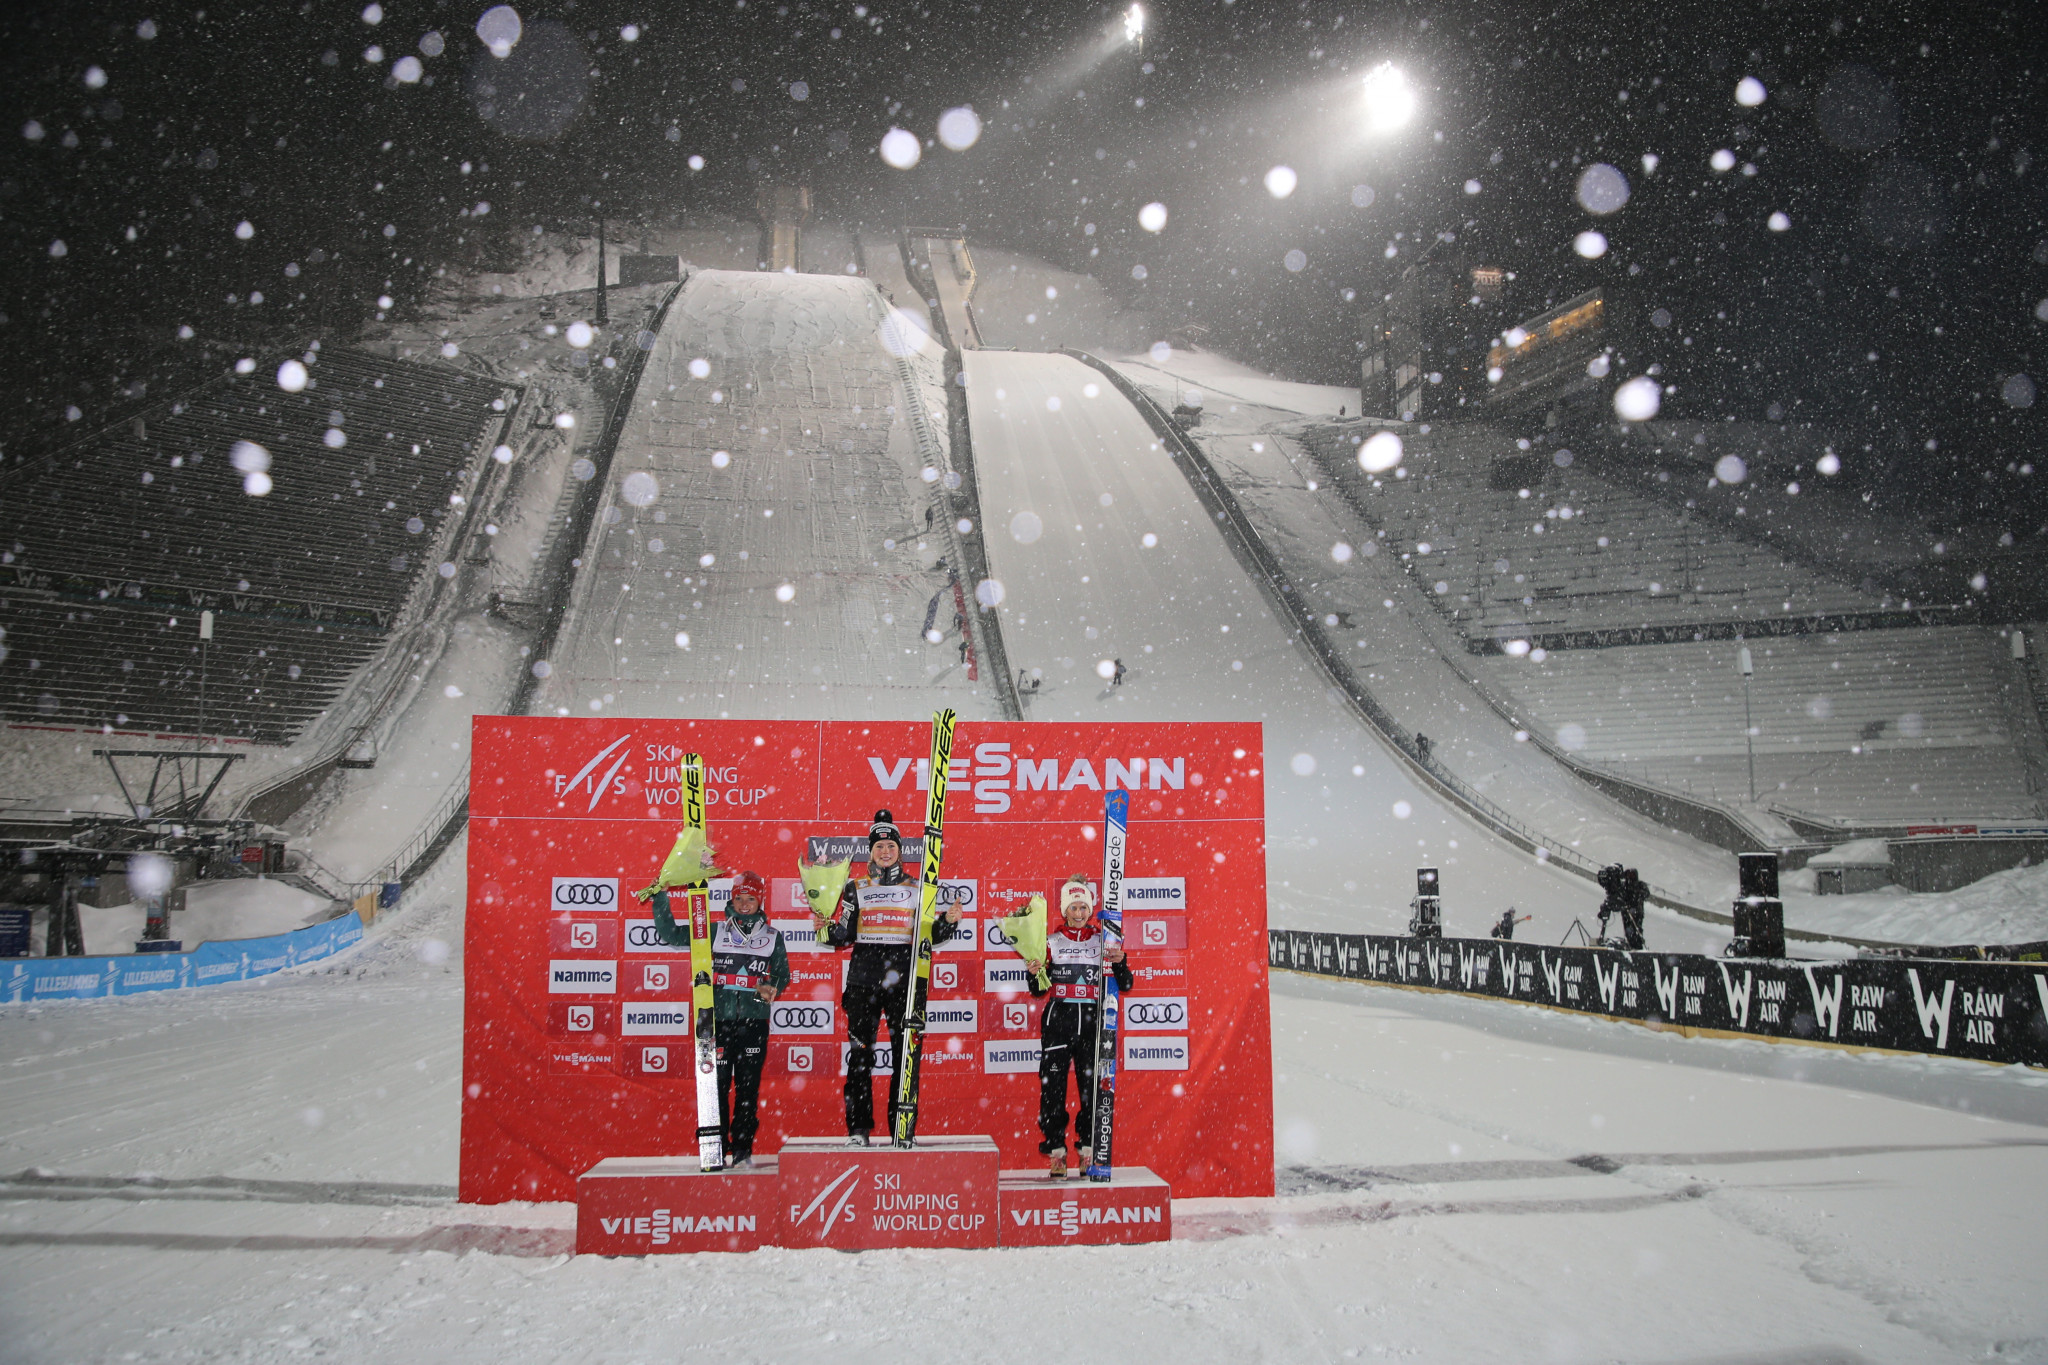 FIS World Cup events in Lillehammer postponed due to COVID-19 "uncertainty"